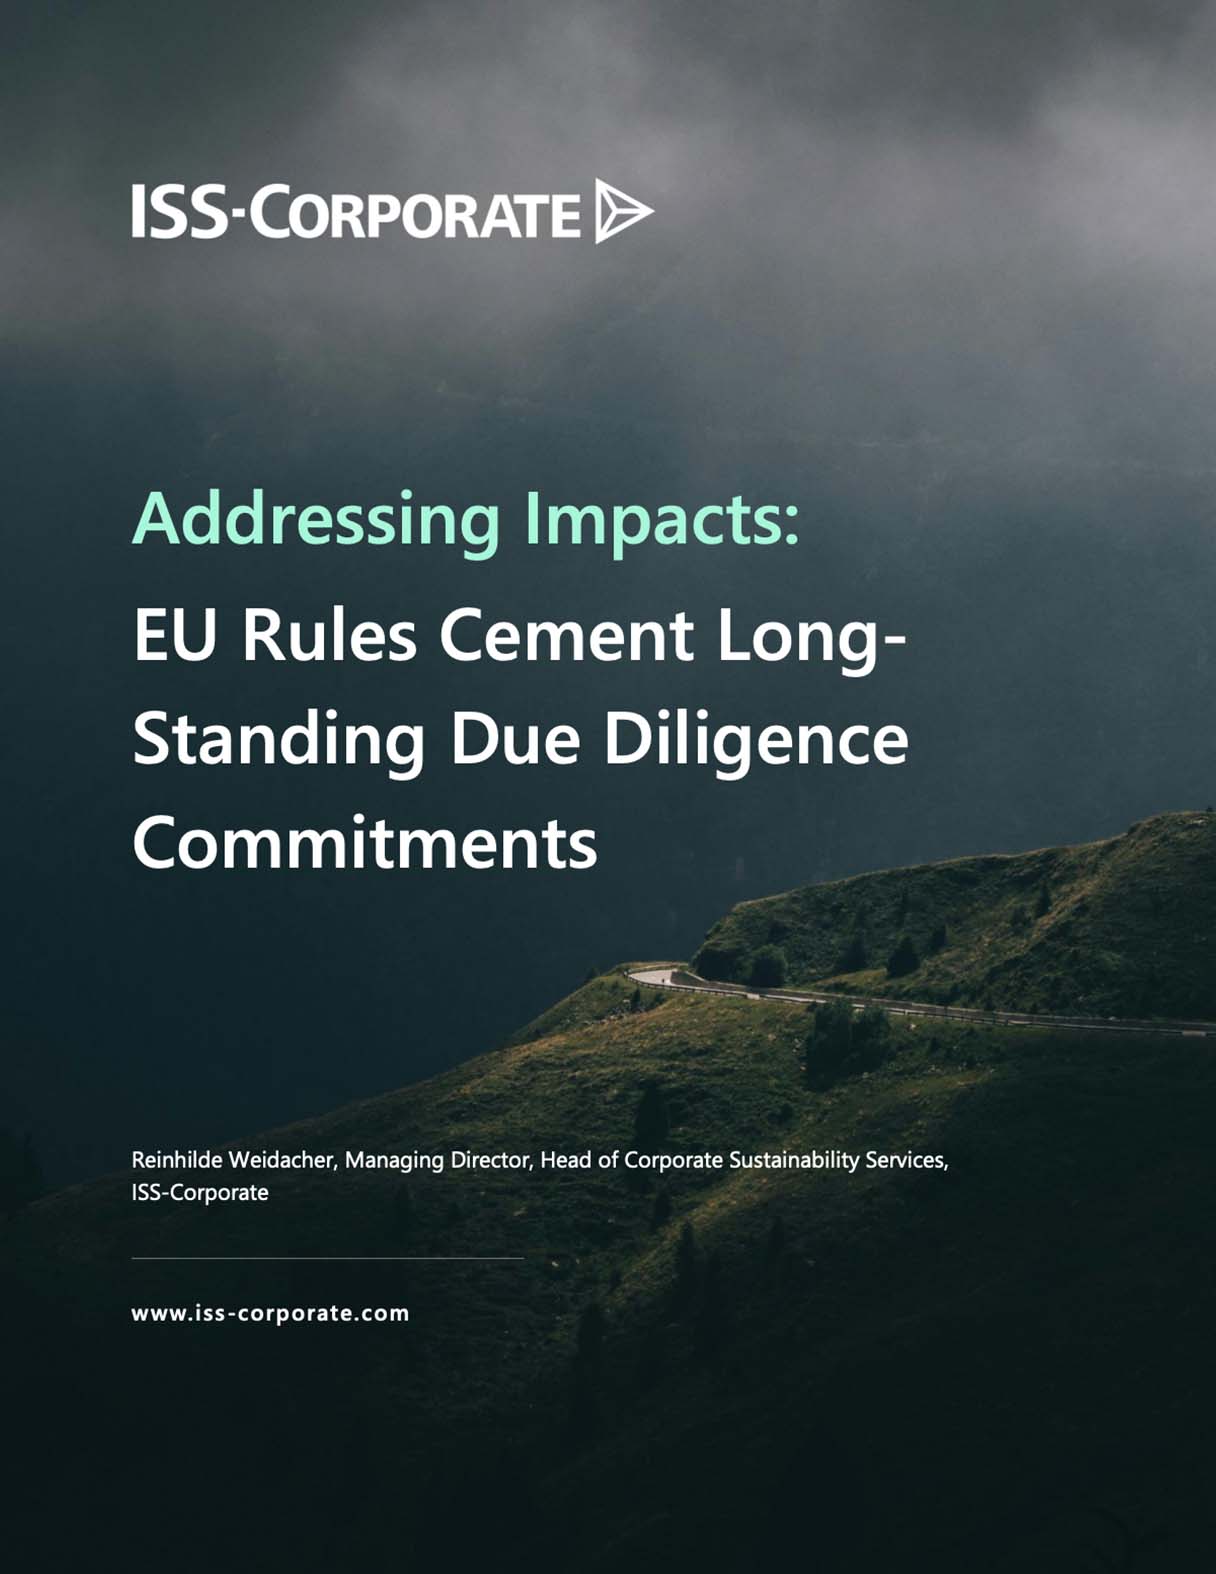 Addressing Impacts: EU Rules Cement Long-Standing Due Diligence Commitments